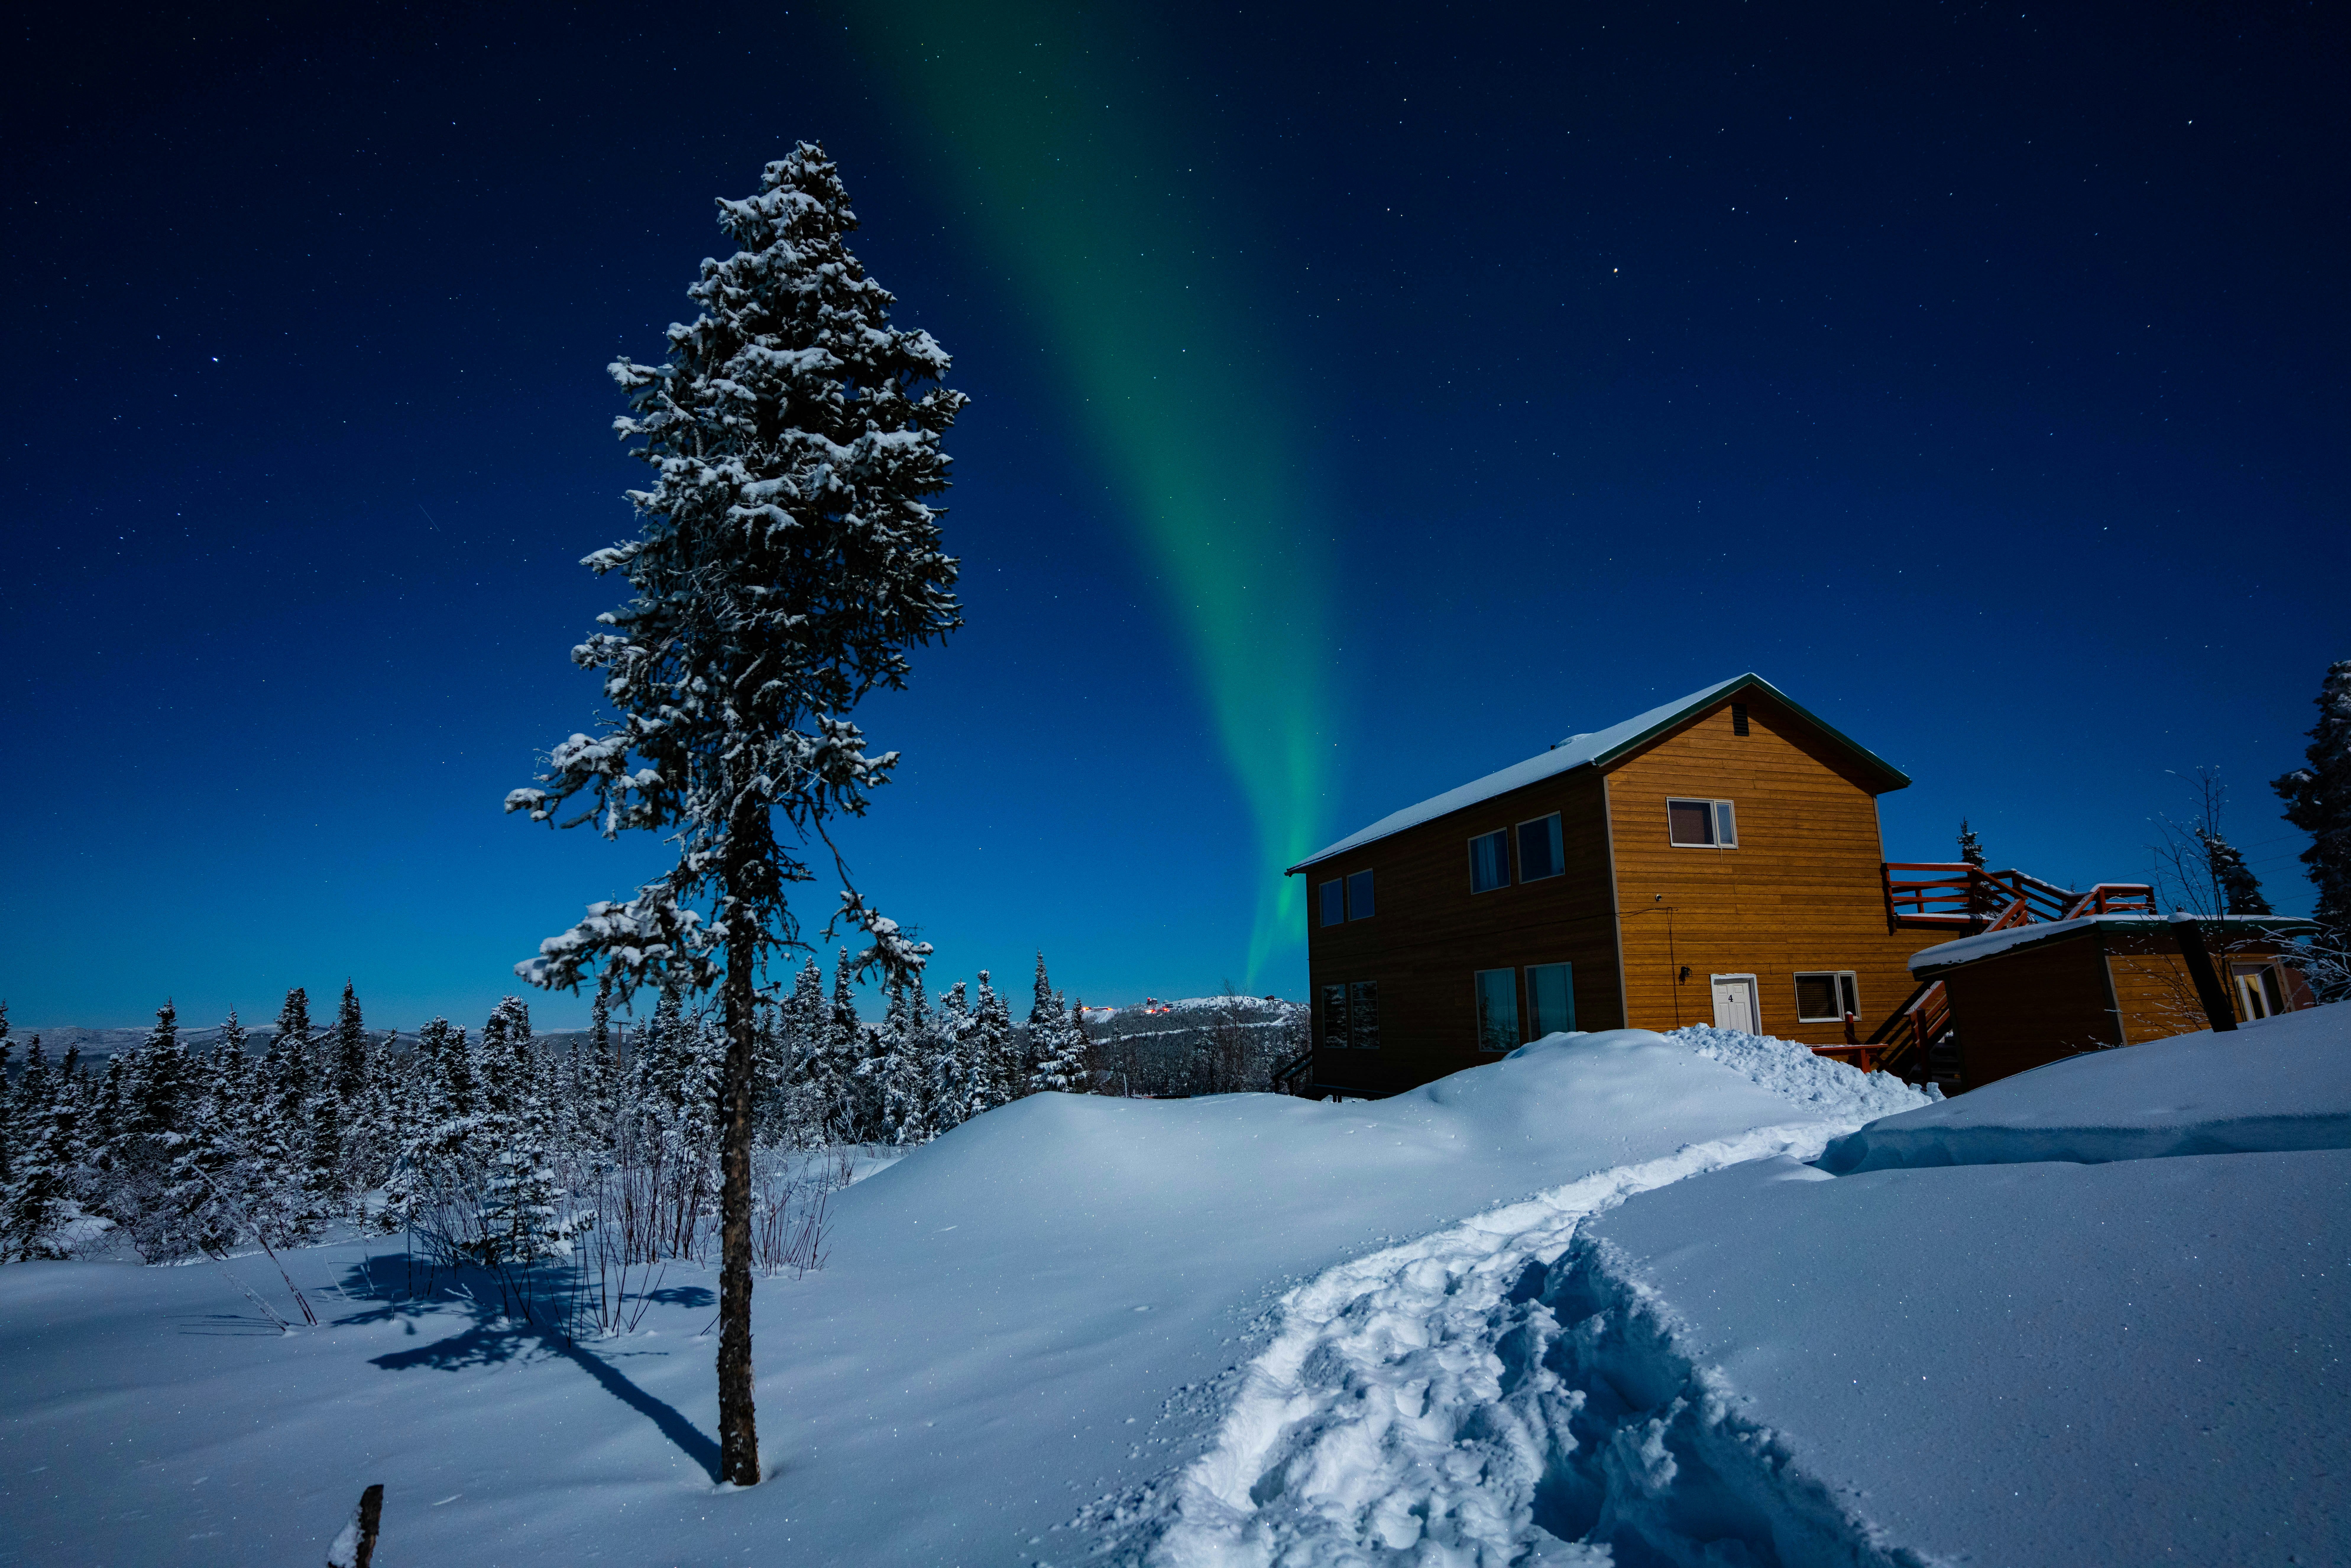 A snowy scene of a wooden cabin surrounded by forest as a flash of green streaks the sky above.